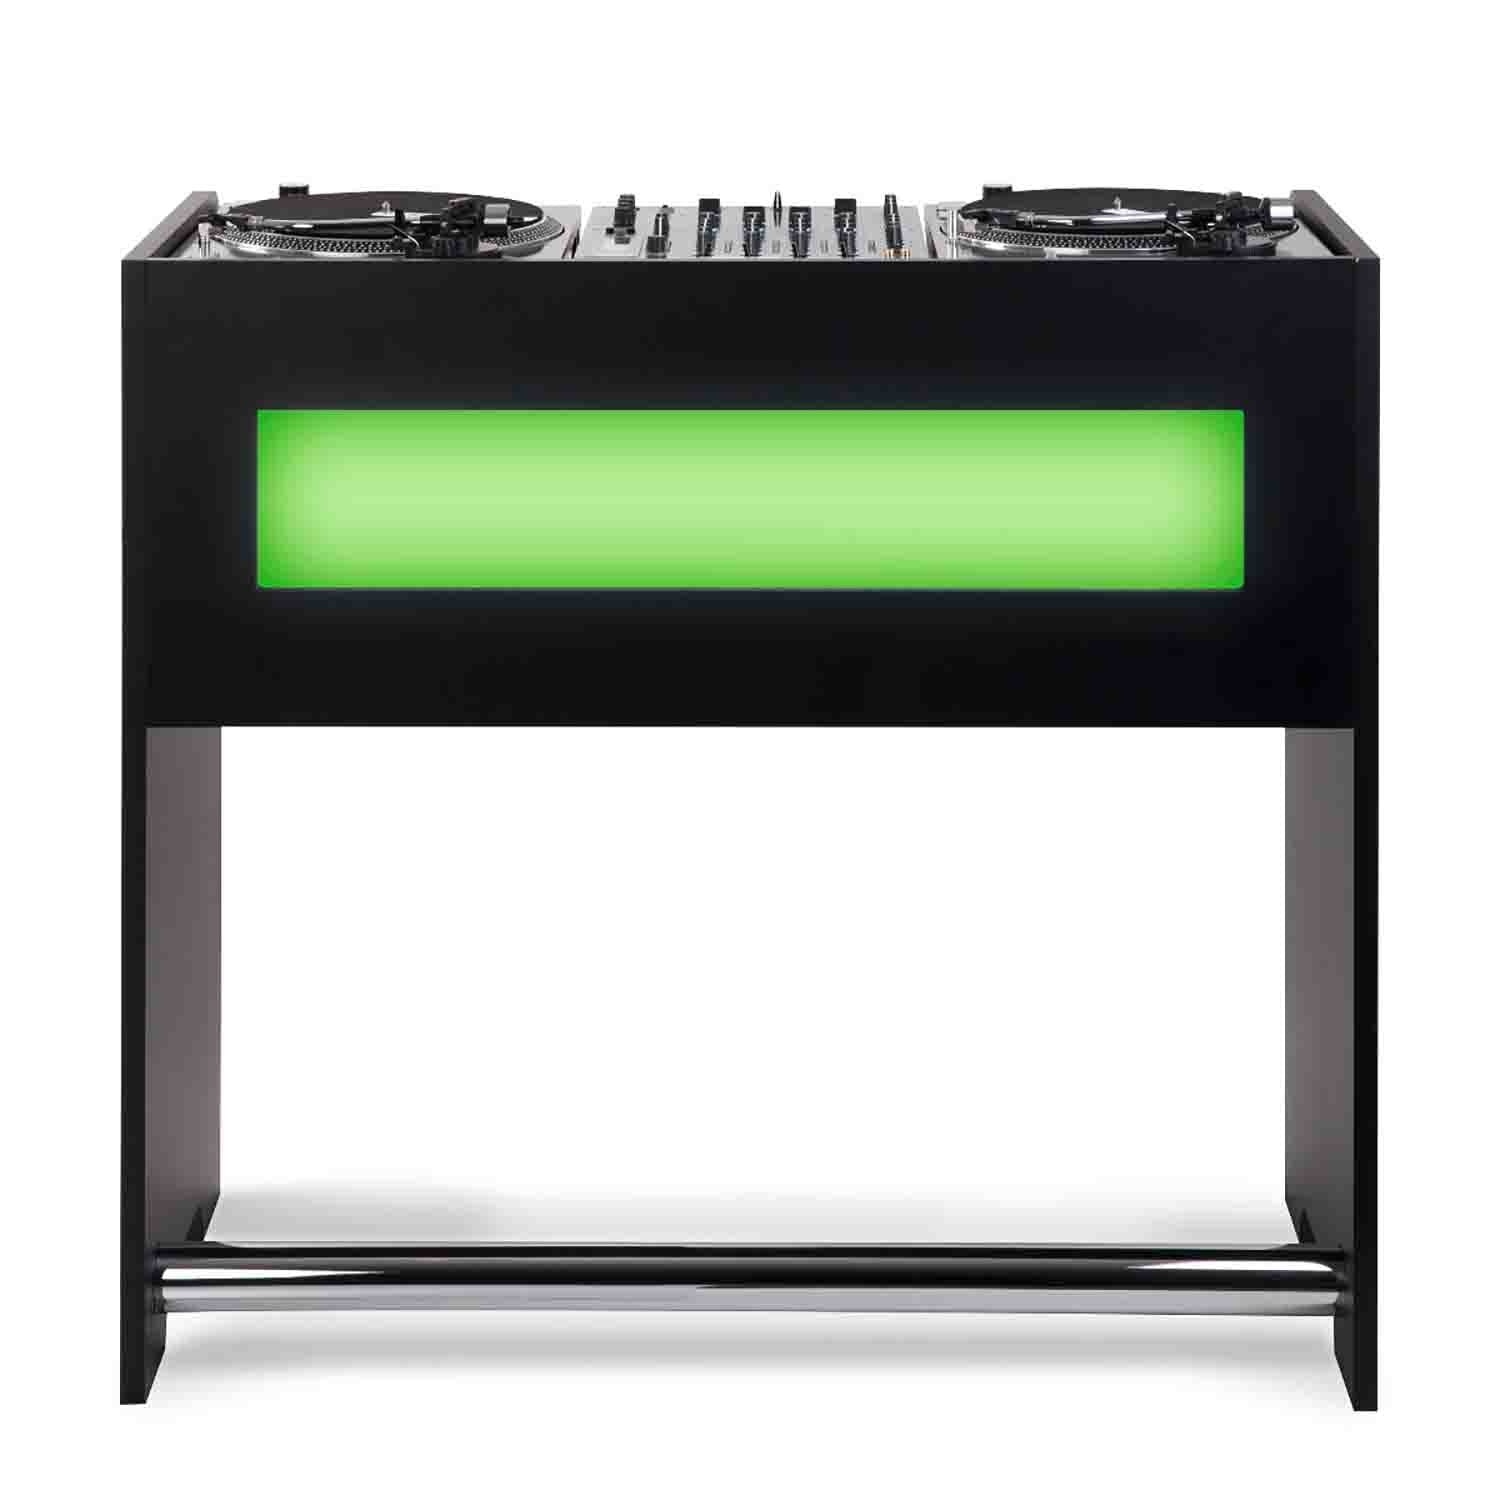 Glorious GigBar DJ Workstation for Turntables and Controllers - Black - Hollywood DJ